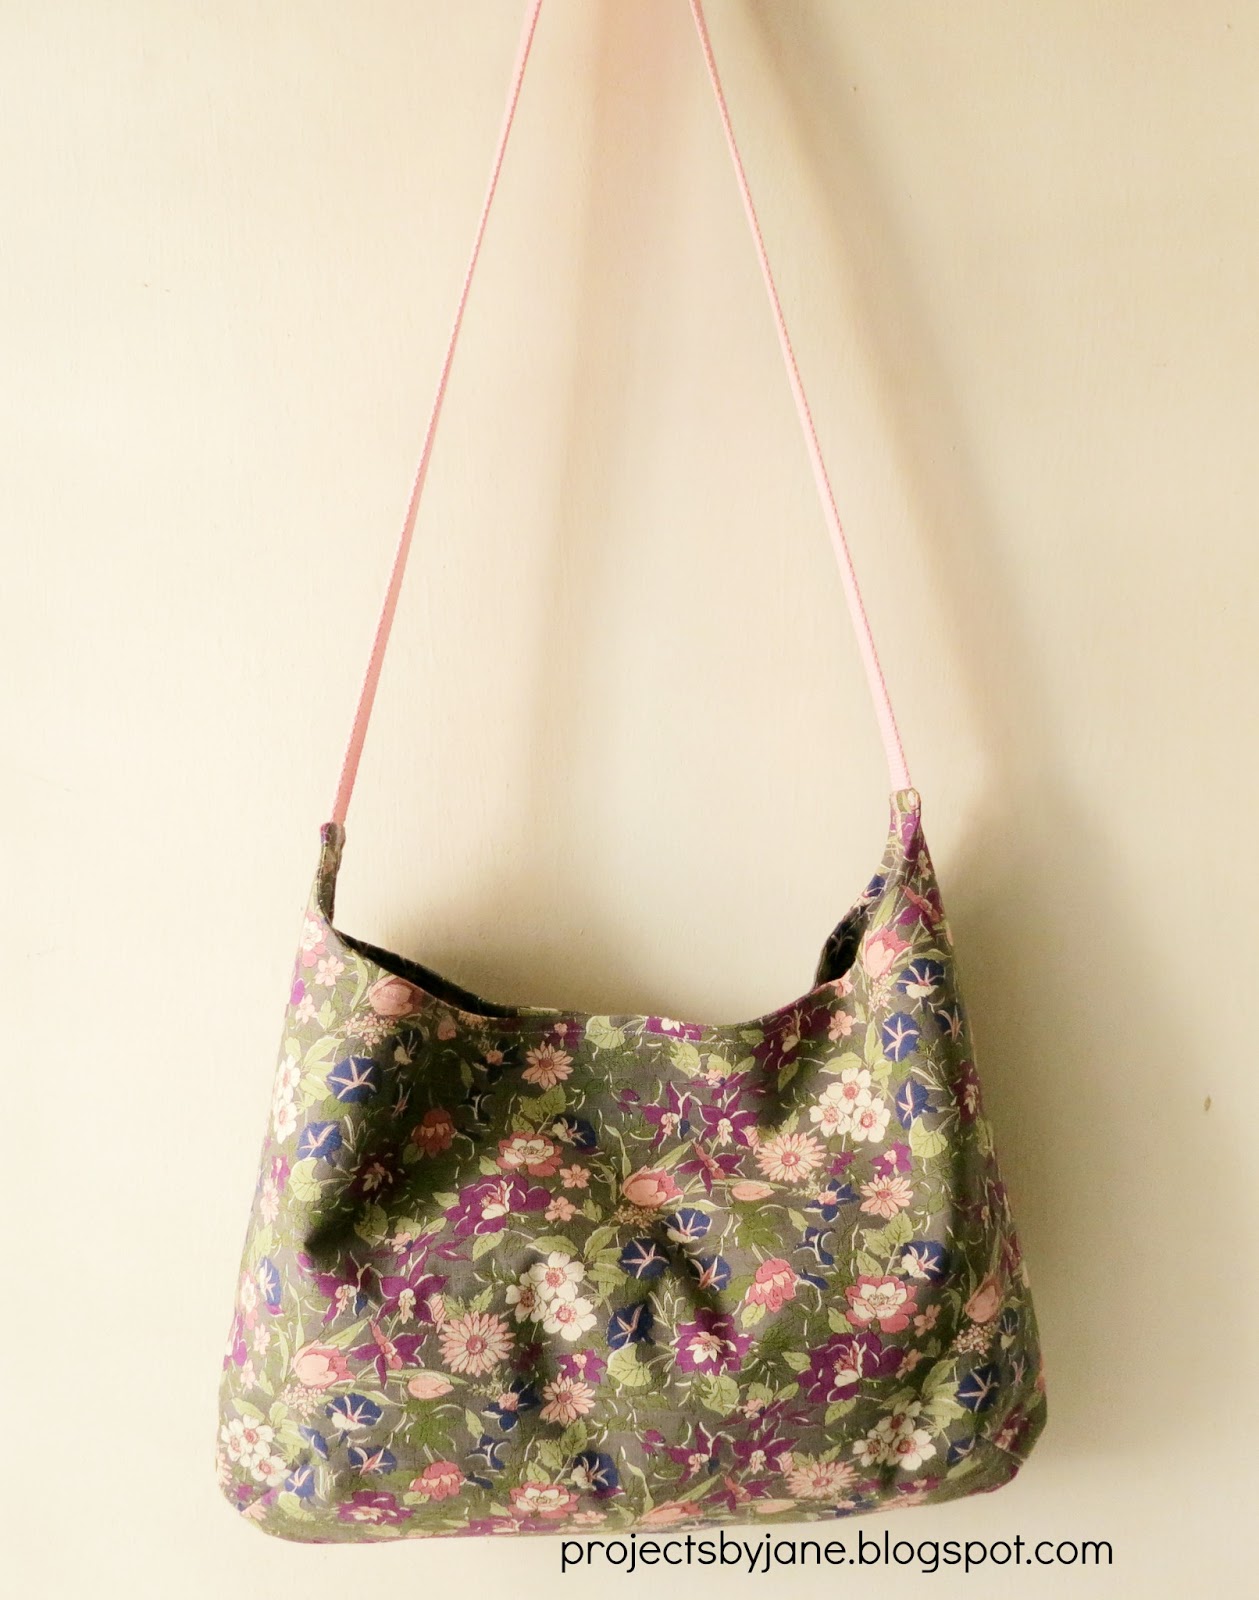 Sling bags and shoulder bags | Projects by Jane